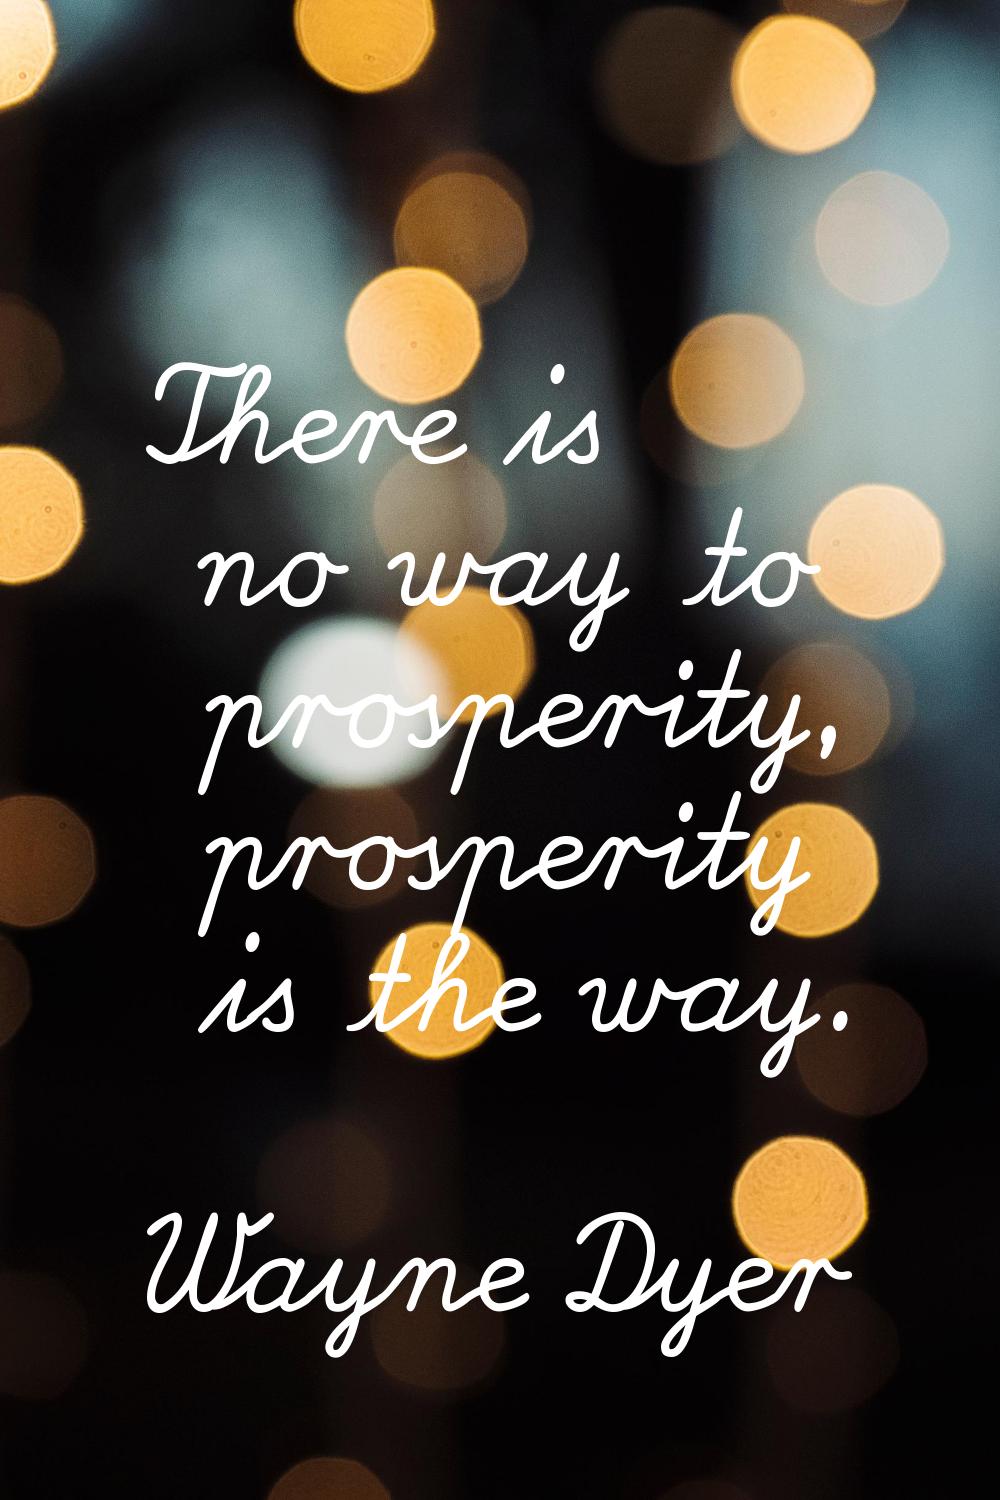 There is no way to prosperity, prosperity is the way.